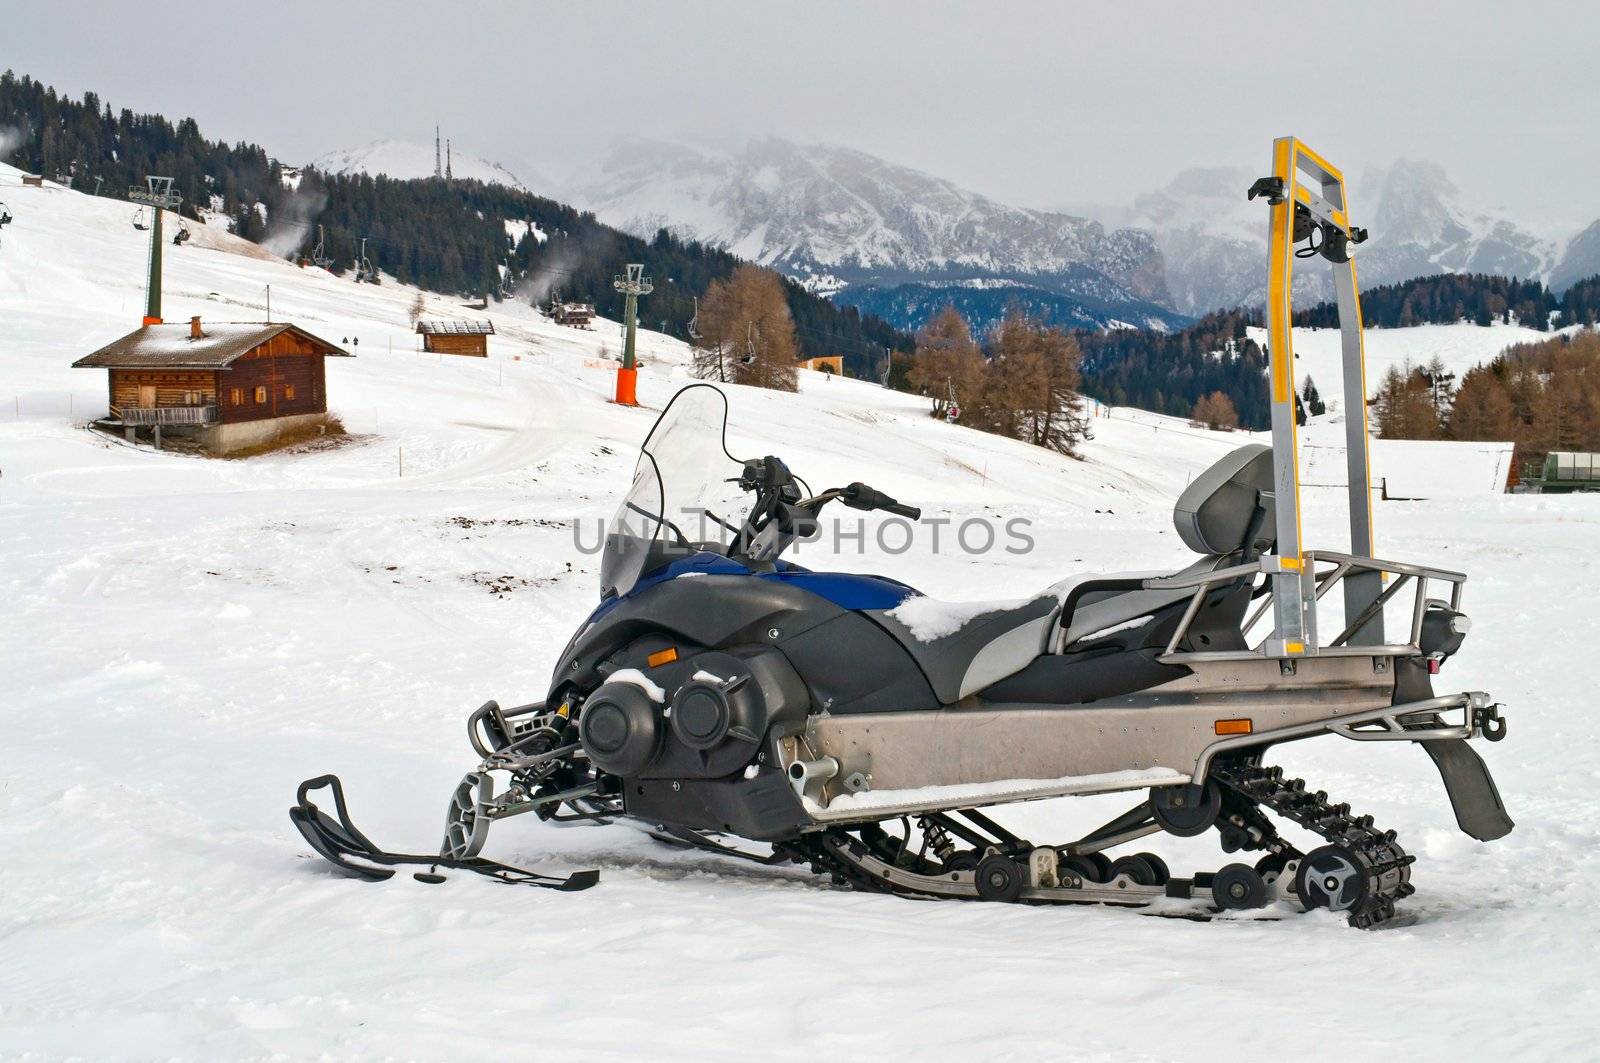 Snowmobile on alps in winter time by rigamondis